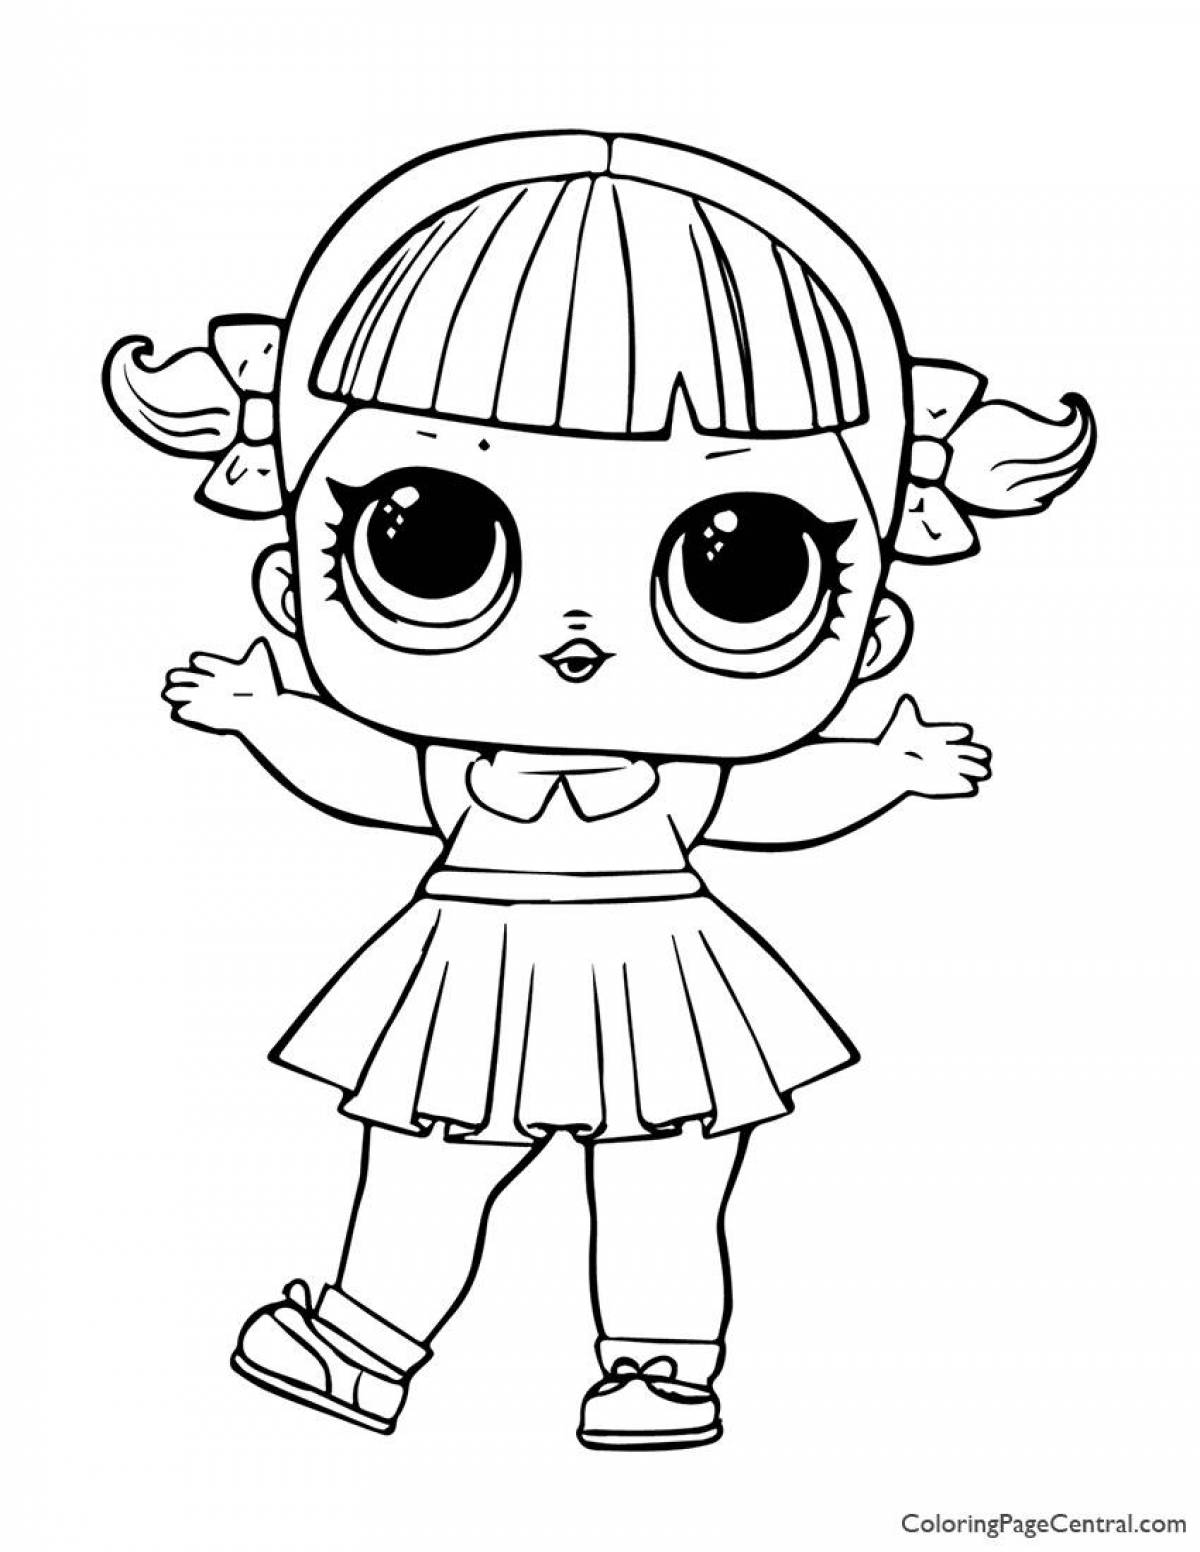 Outstanding lola coloring page for kids